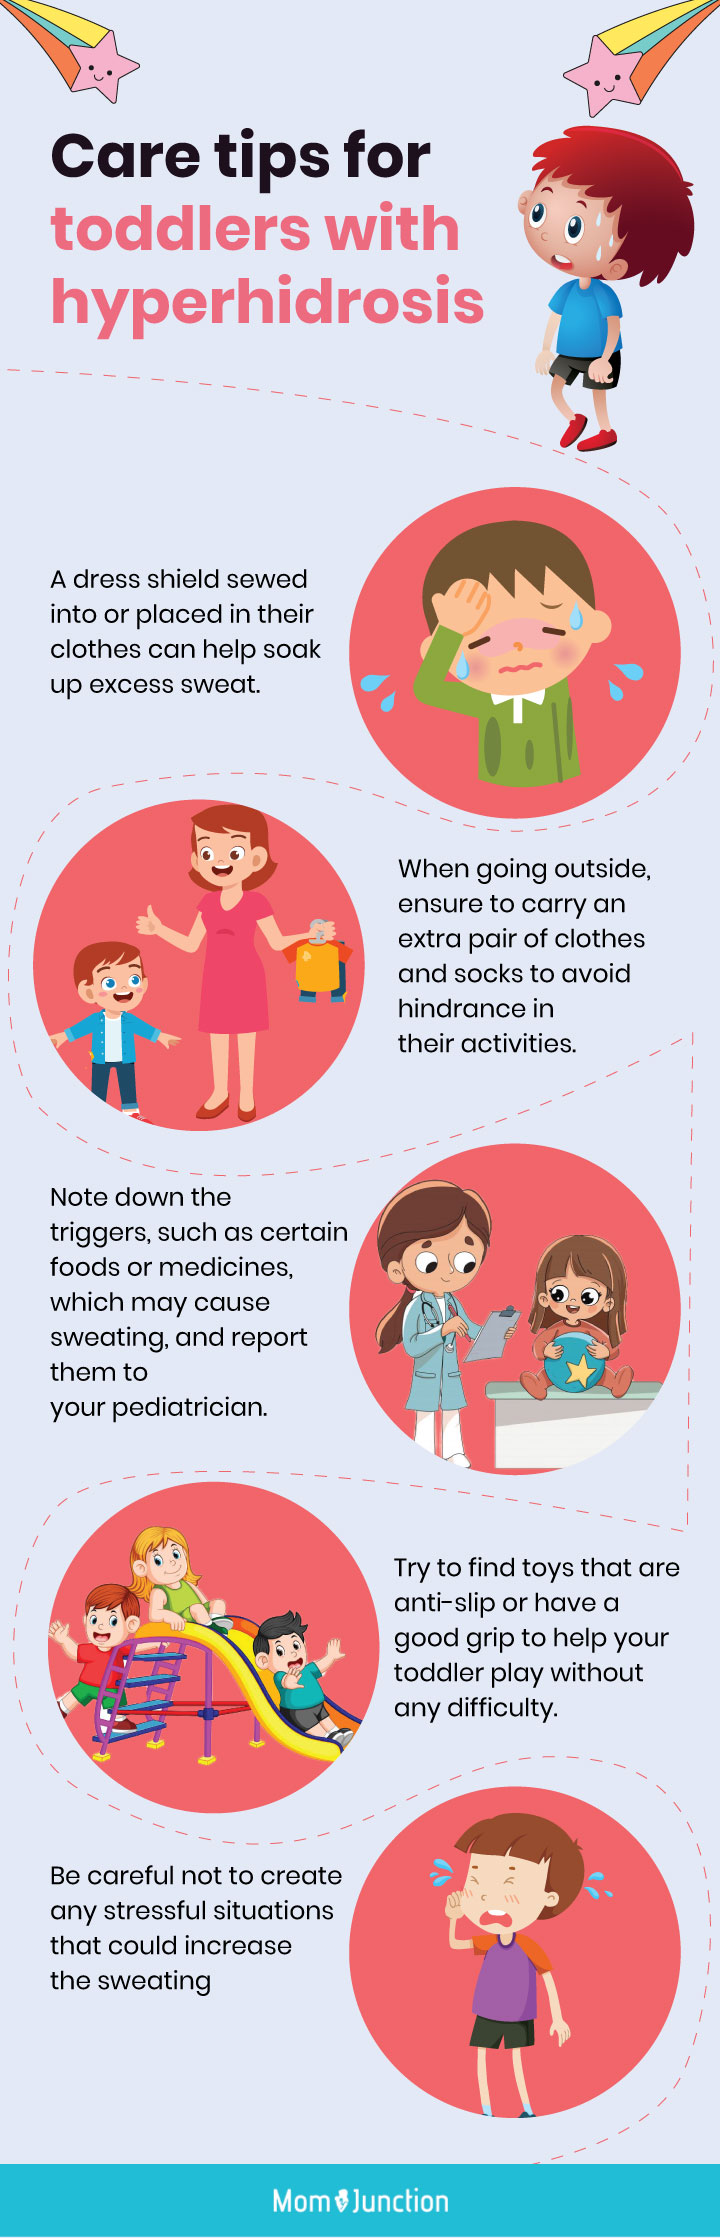 care tips for toddlers with hyperhidrosis [infographic]